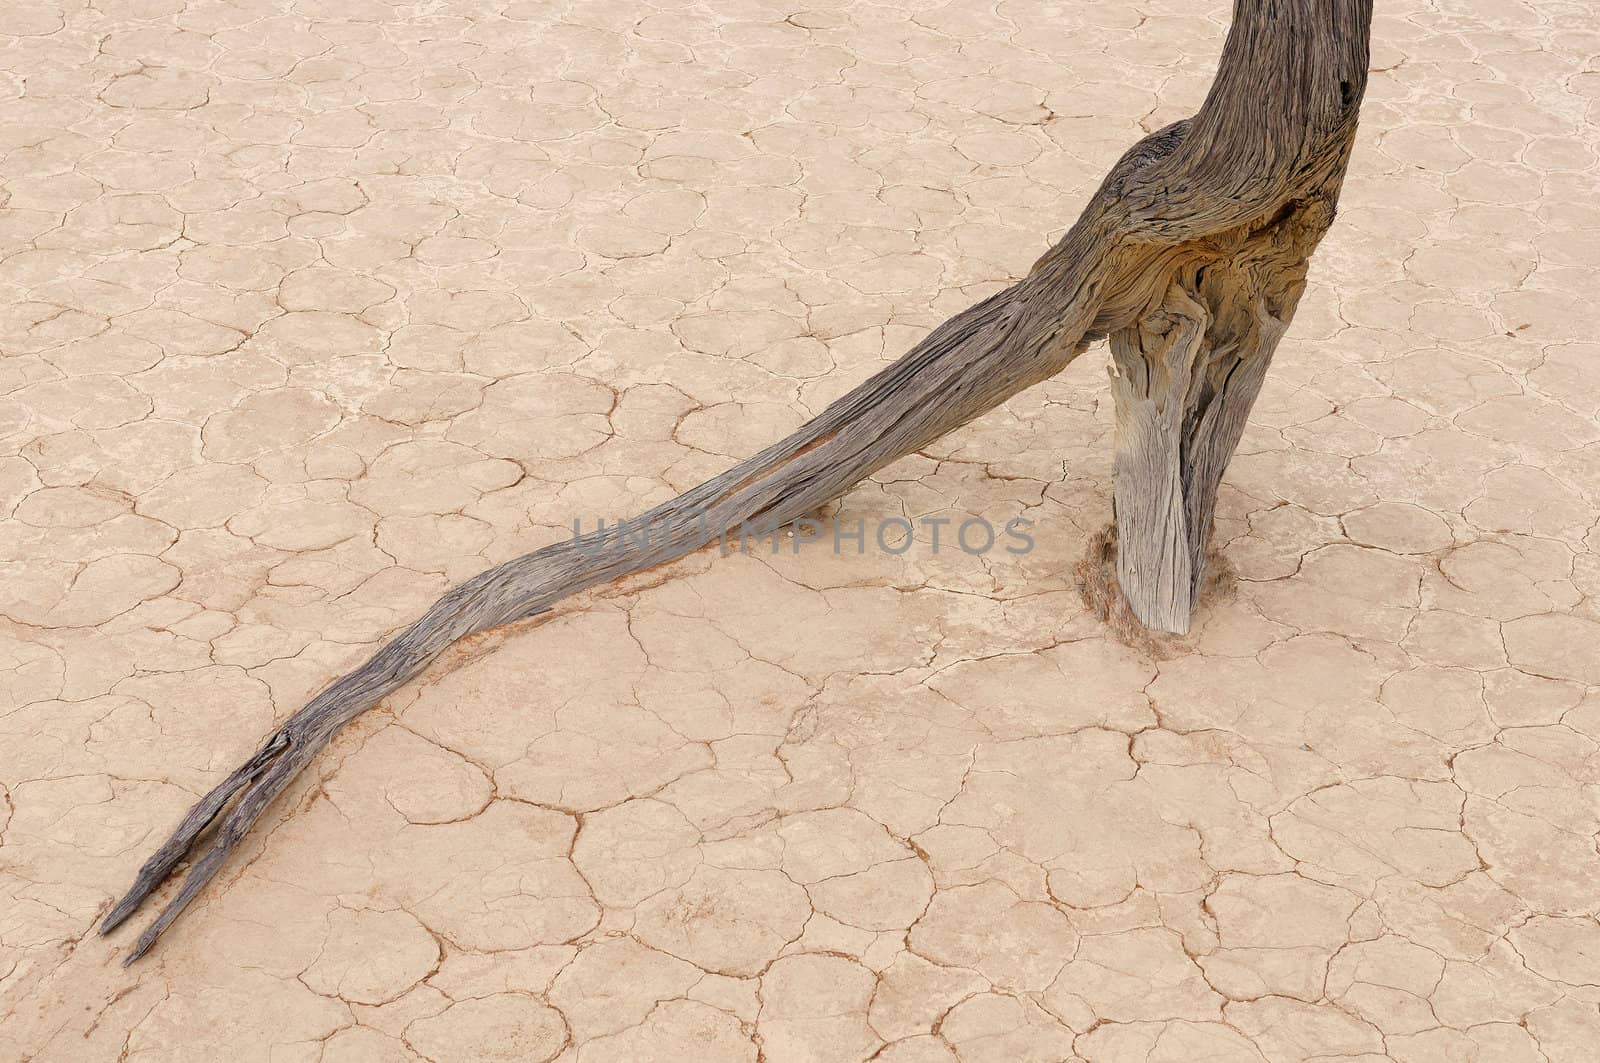 Tree skeleton and a bare root at Deadvlei near Sossusvlei, Namibia